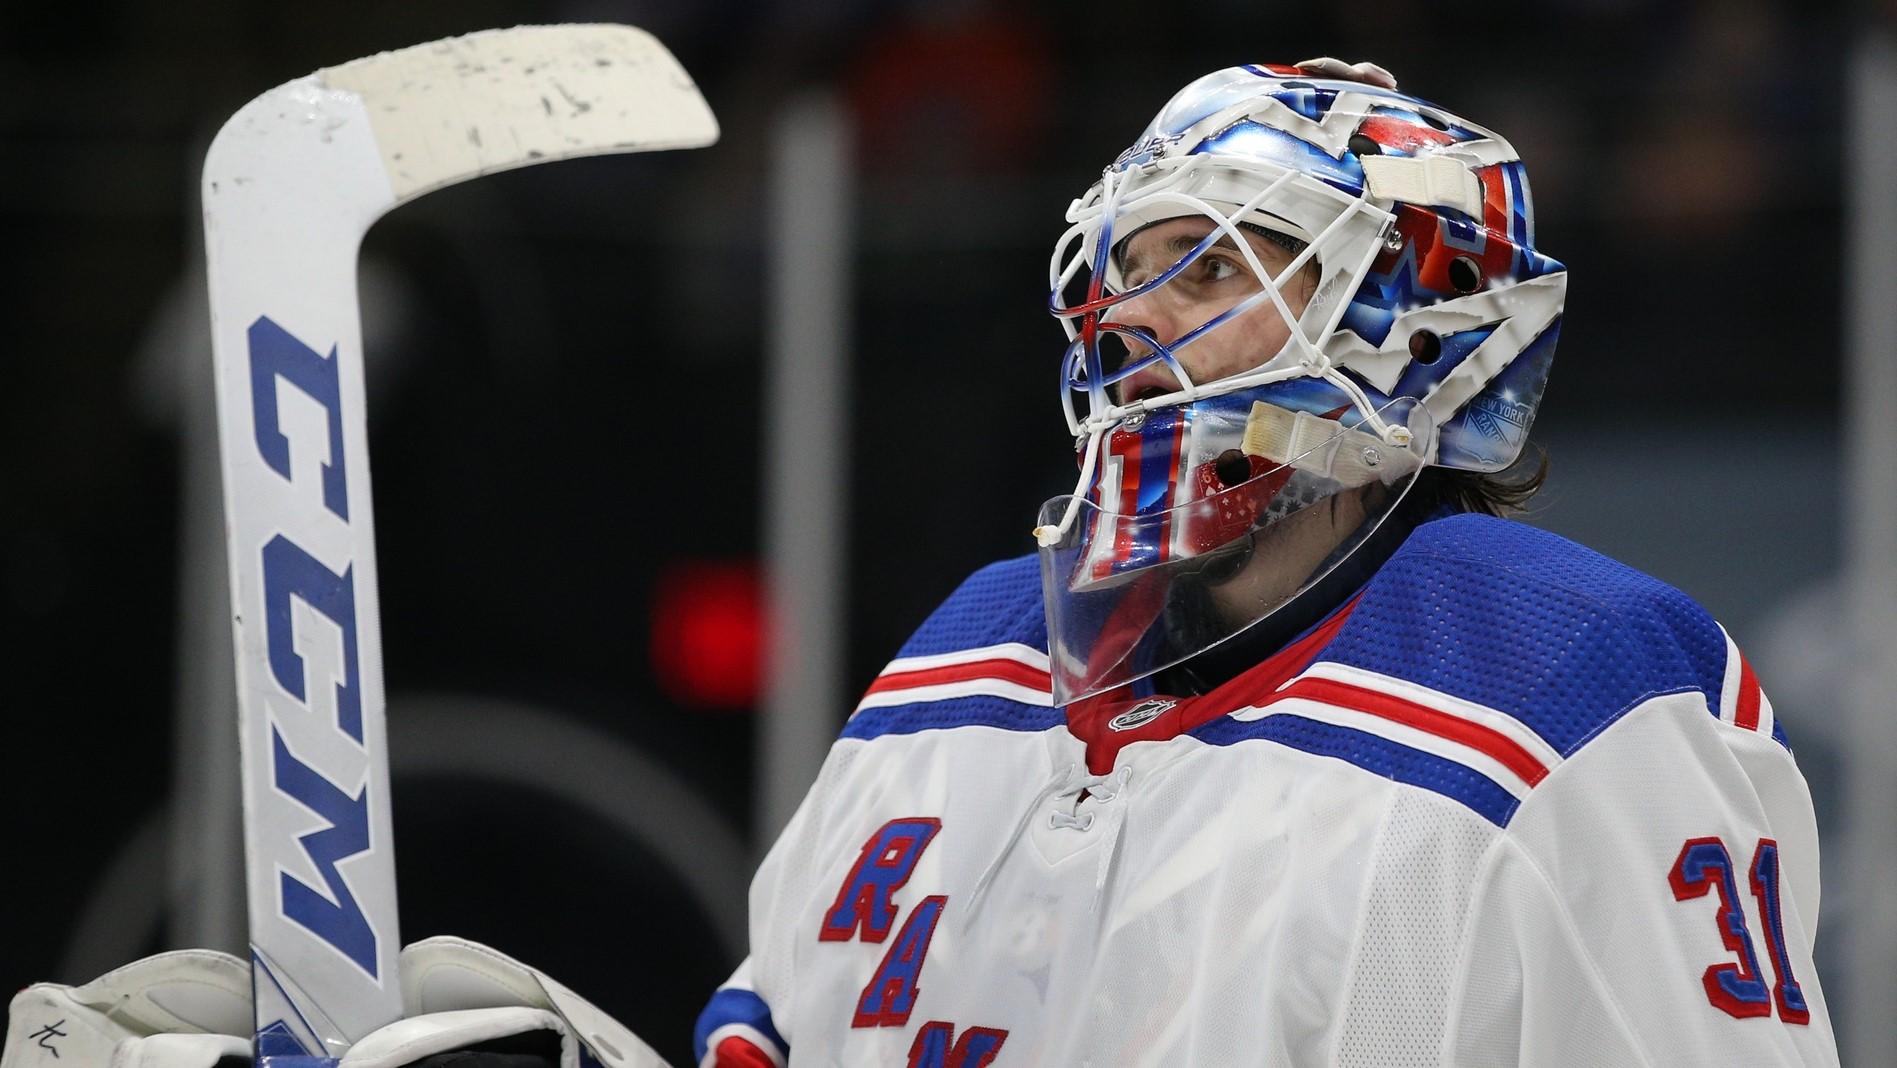 Apr 20, 2021; Uniondale, New York, USA; New York Rangers goalie Igor Shesterkin (31) reacts during the third period against the New York Islanders at Nassau Veterans Memorial Coliseum. / Brad Penner-USA TODAY Sports